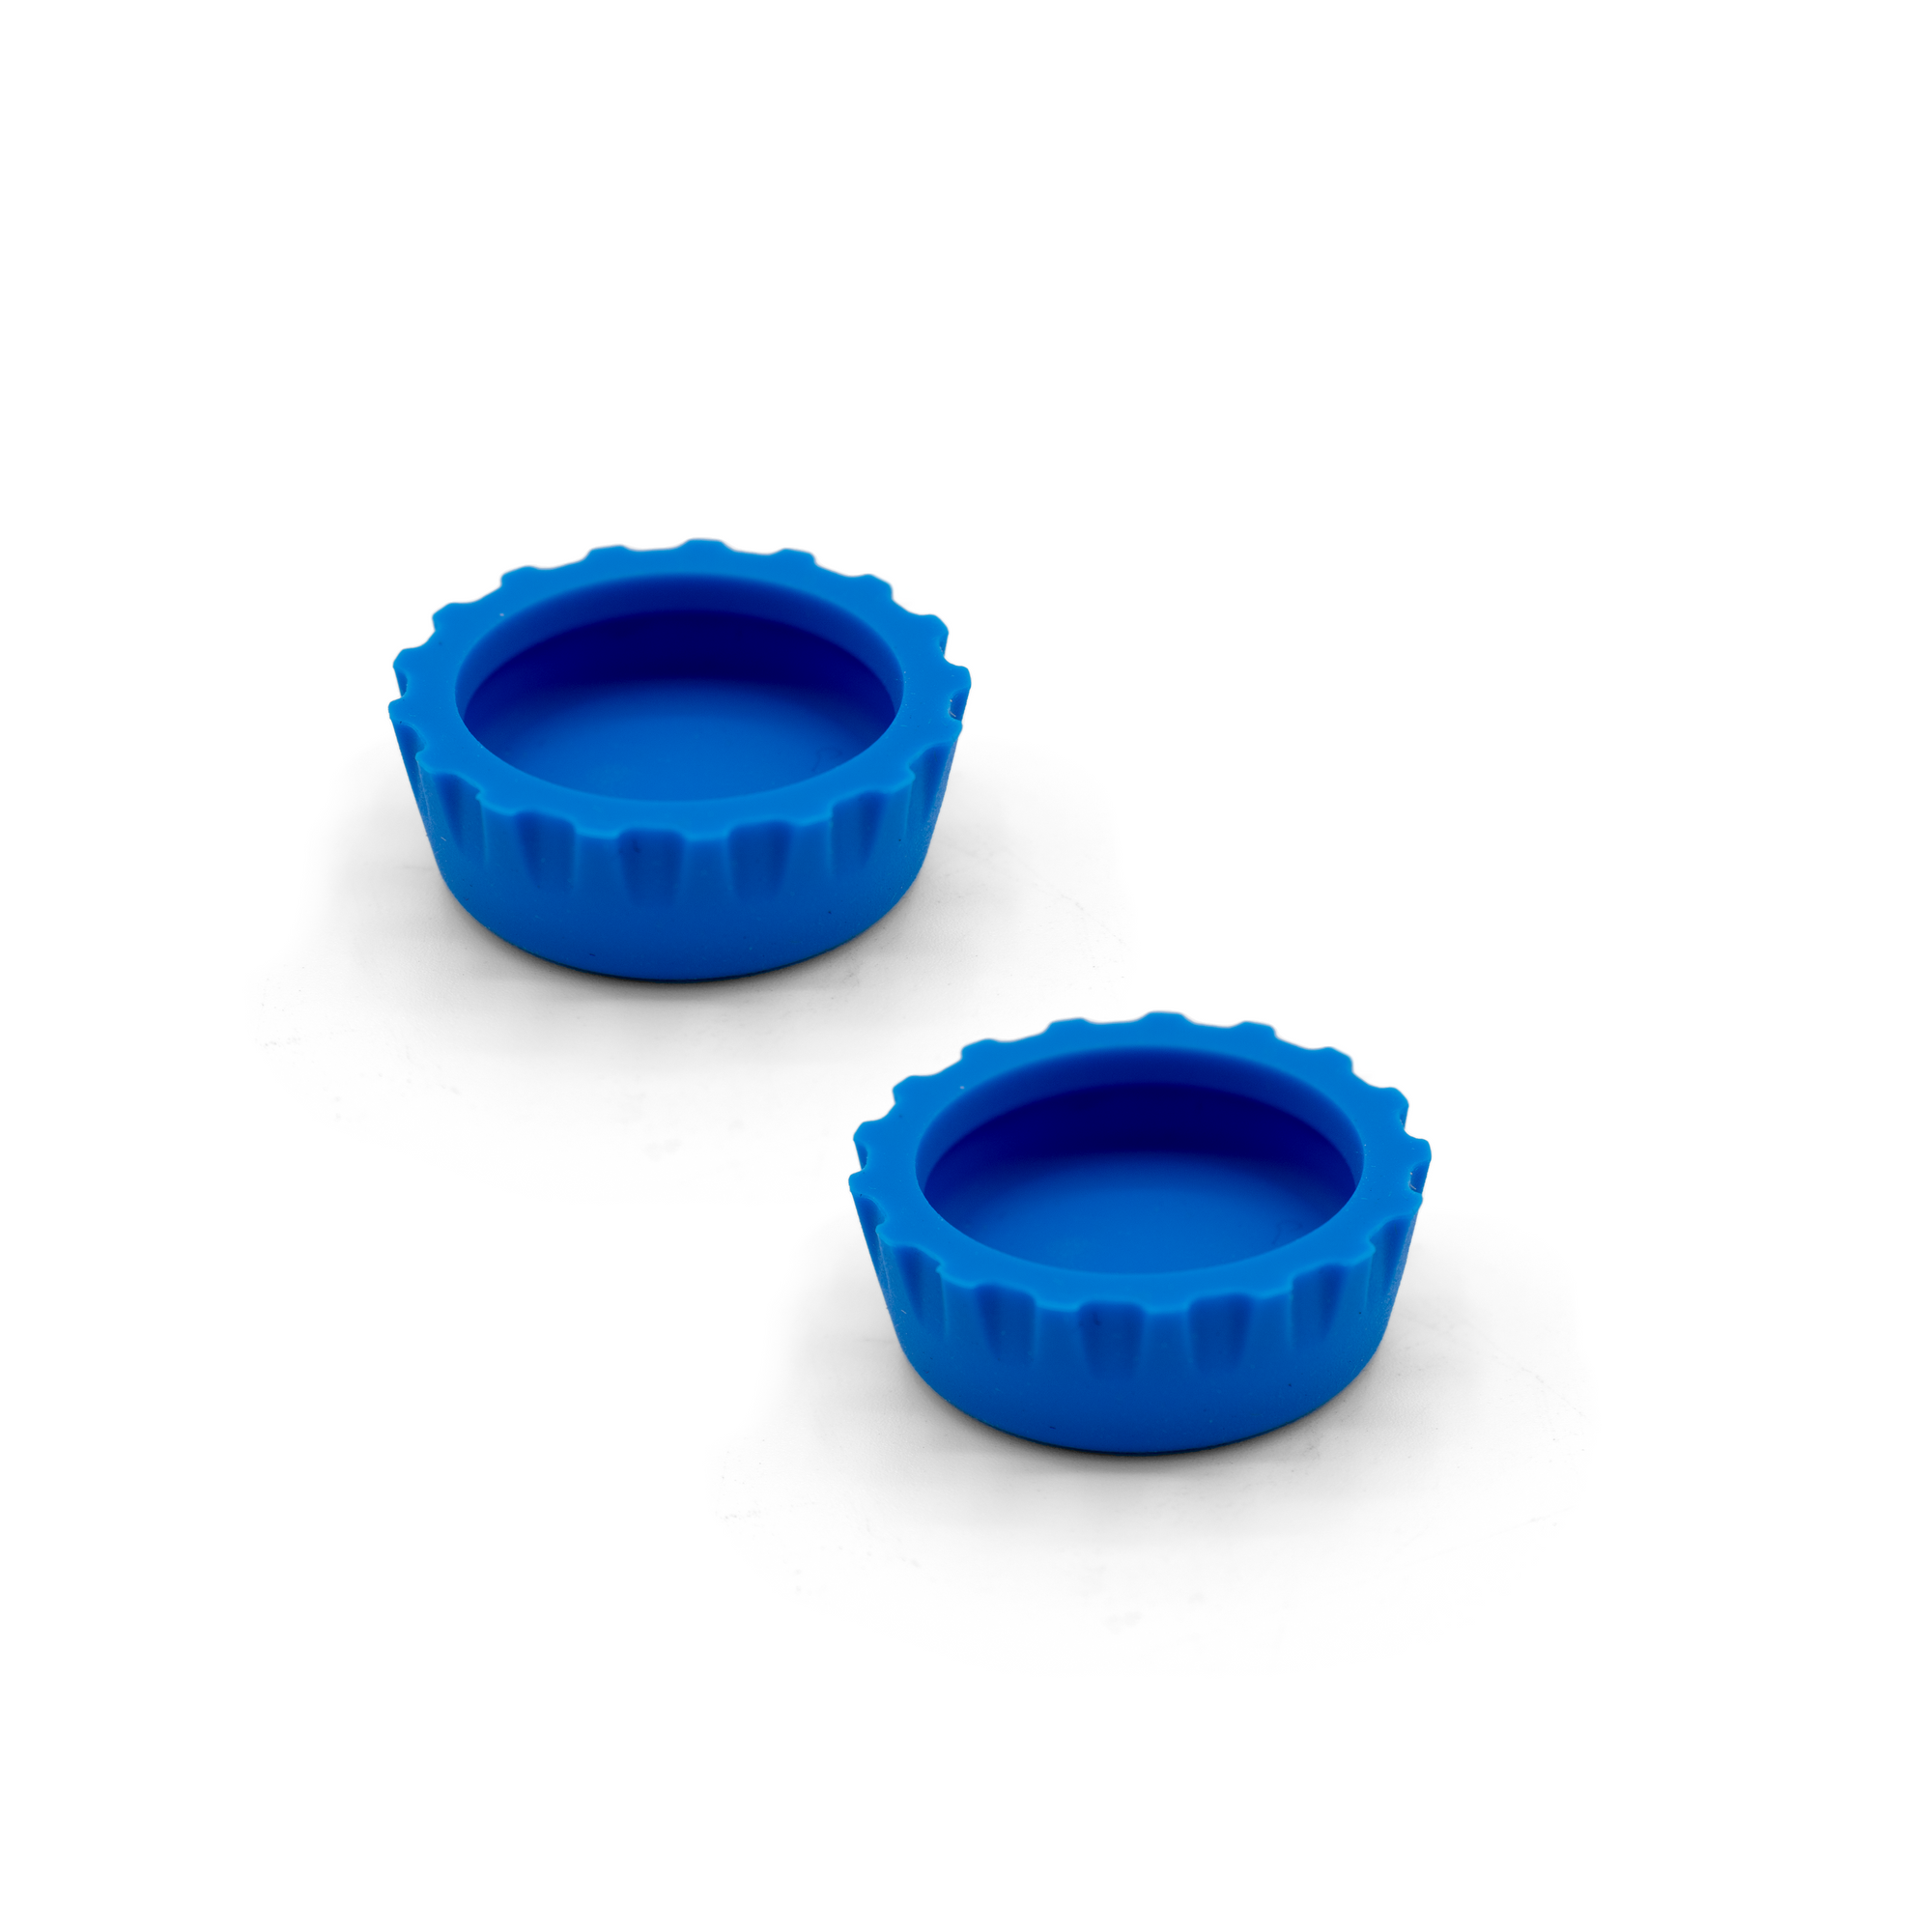 2-Pack of Silicone Bottle Caps - Blue